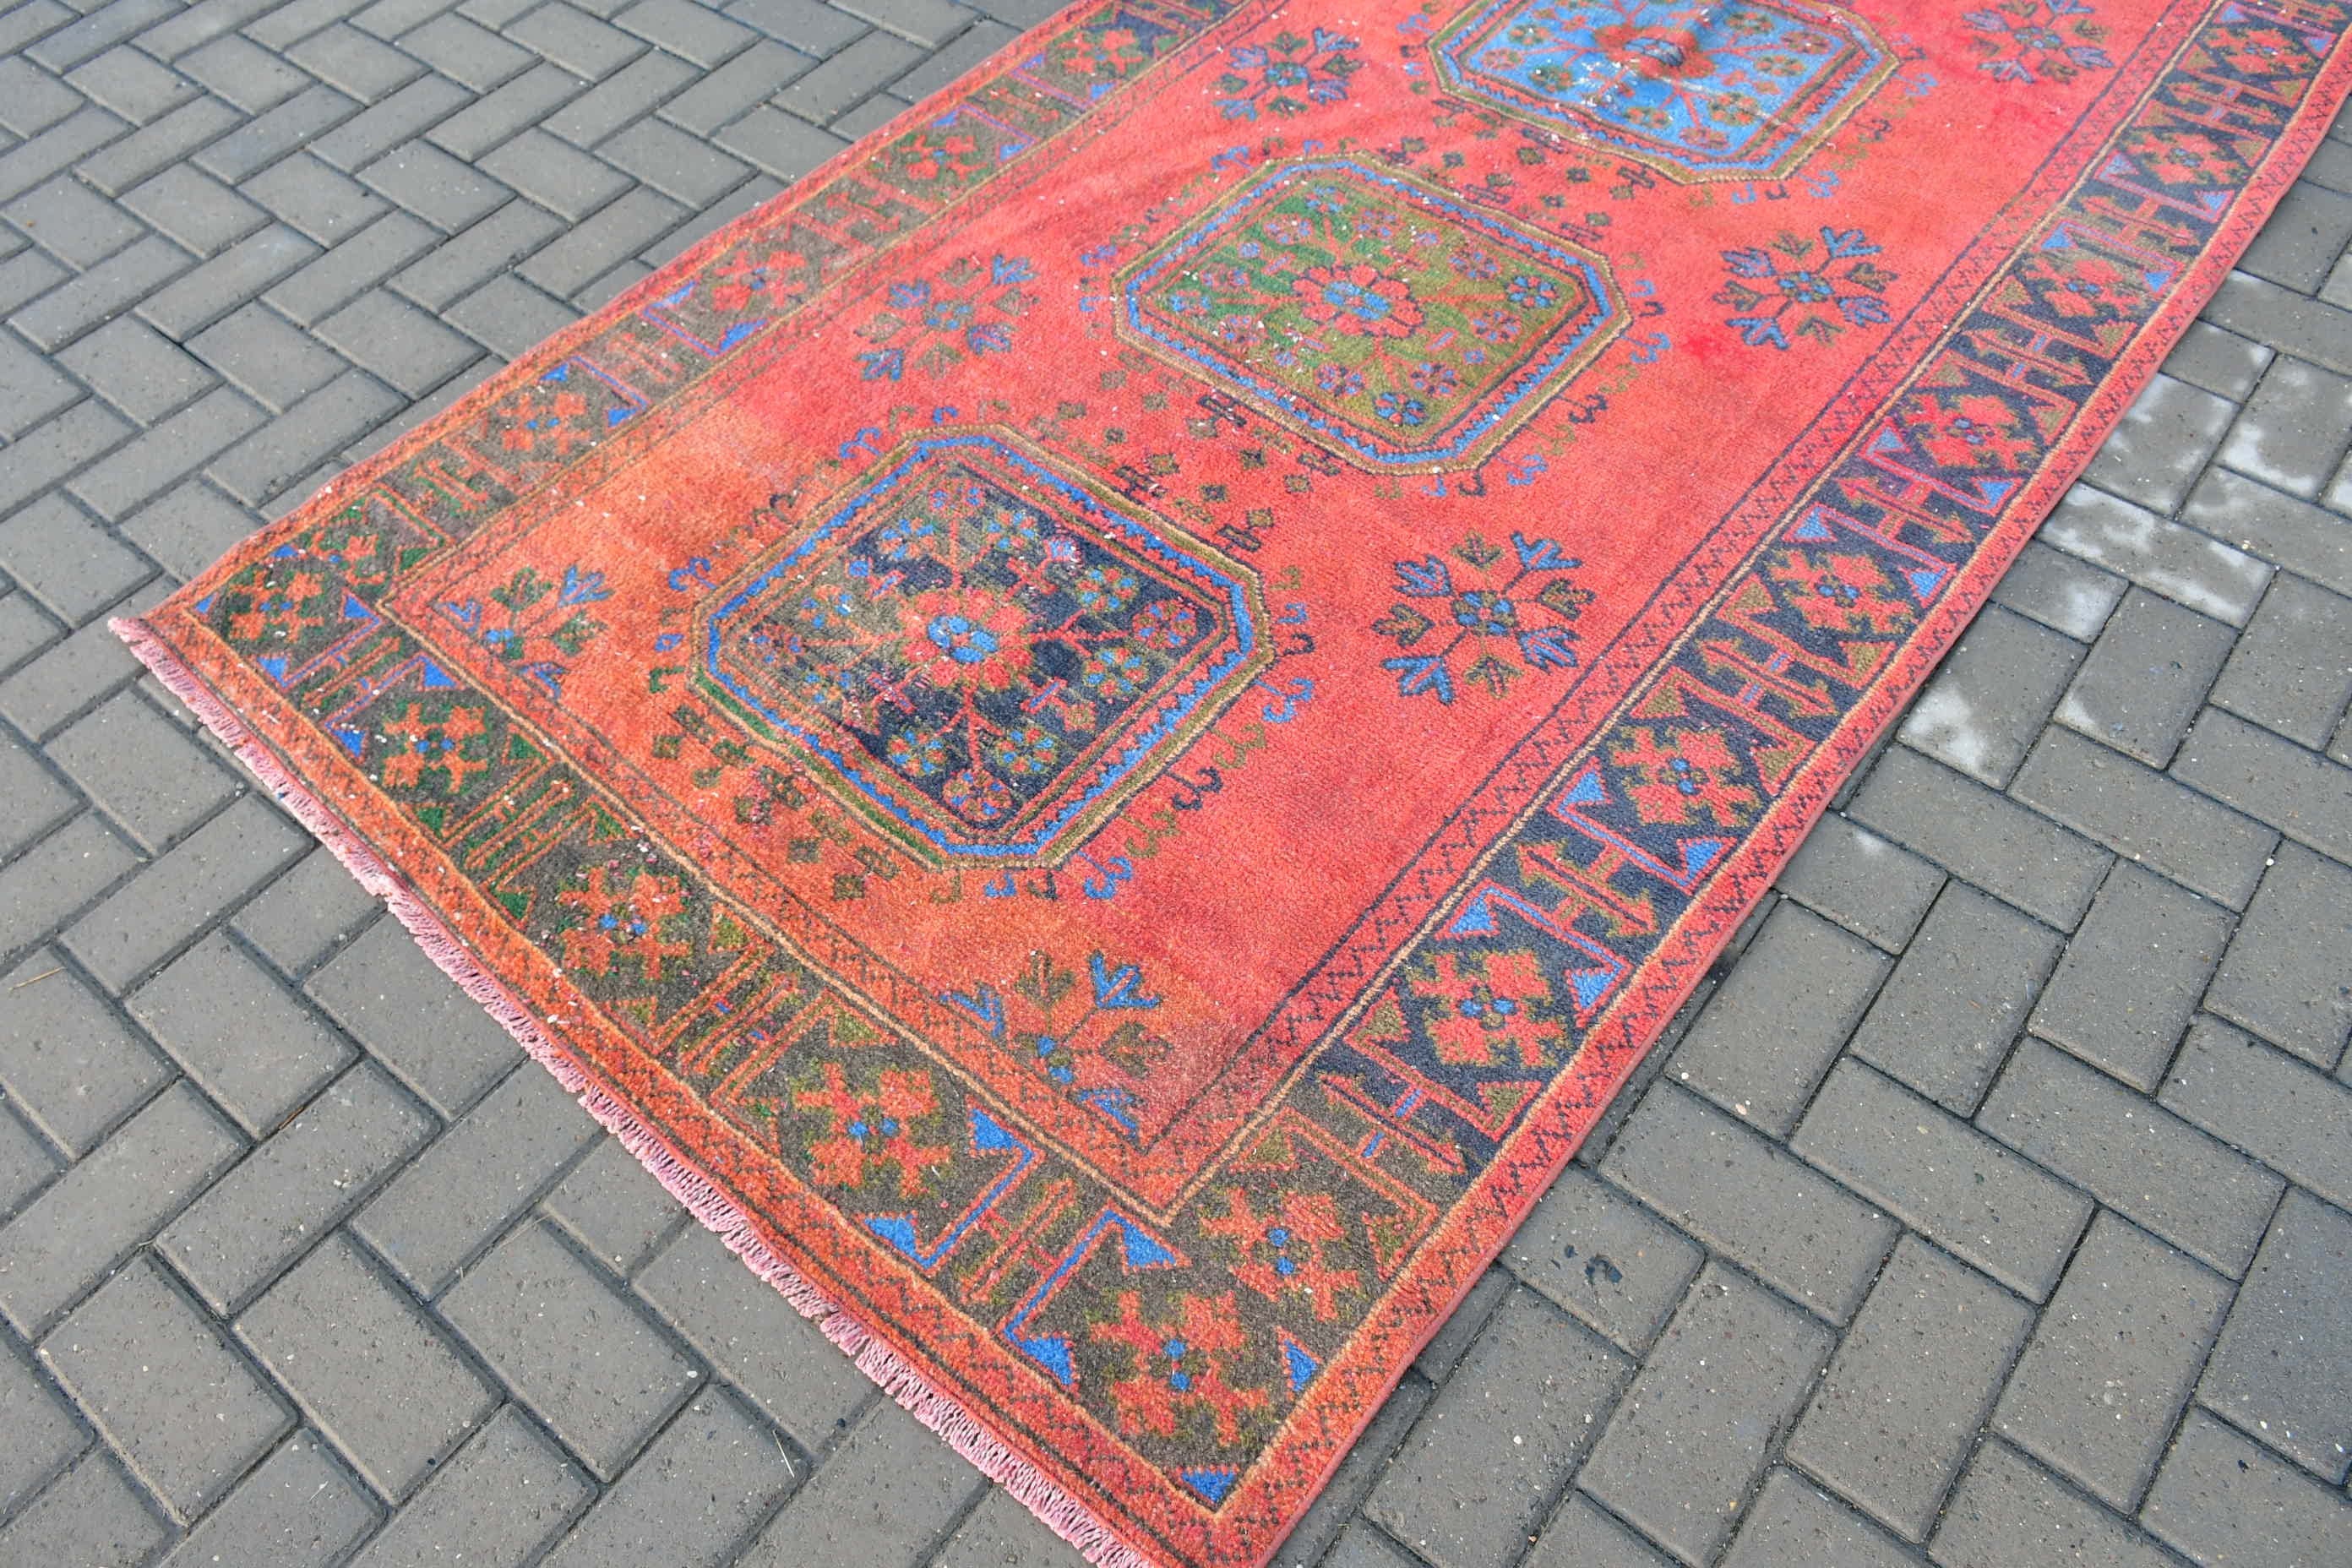 Vintage Rug, Stair Rug, Art Rug, 4.5x11.3 ft Runner Rug, Rugs for Kitchen, Red Home Decor Rugs, Antique Rug, Turkish Rugs